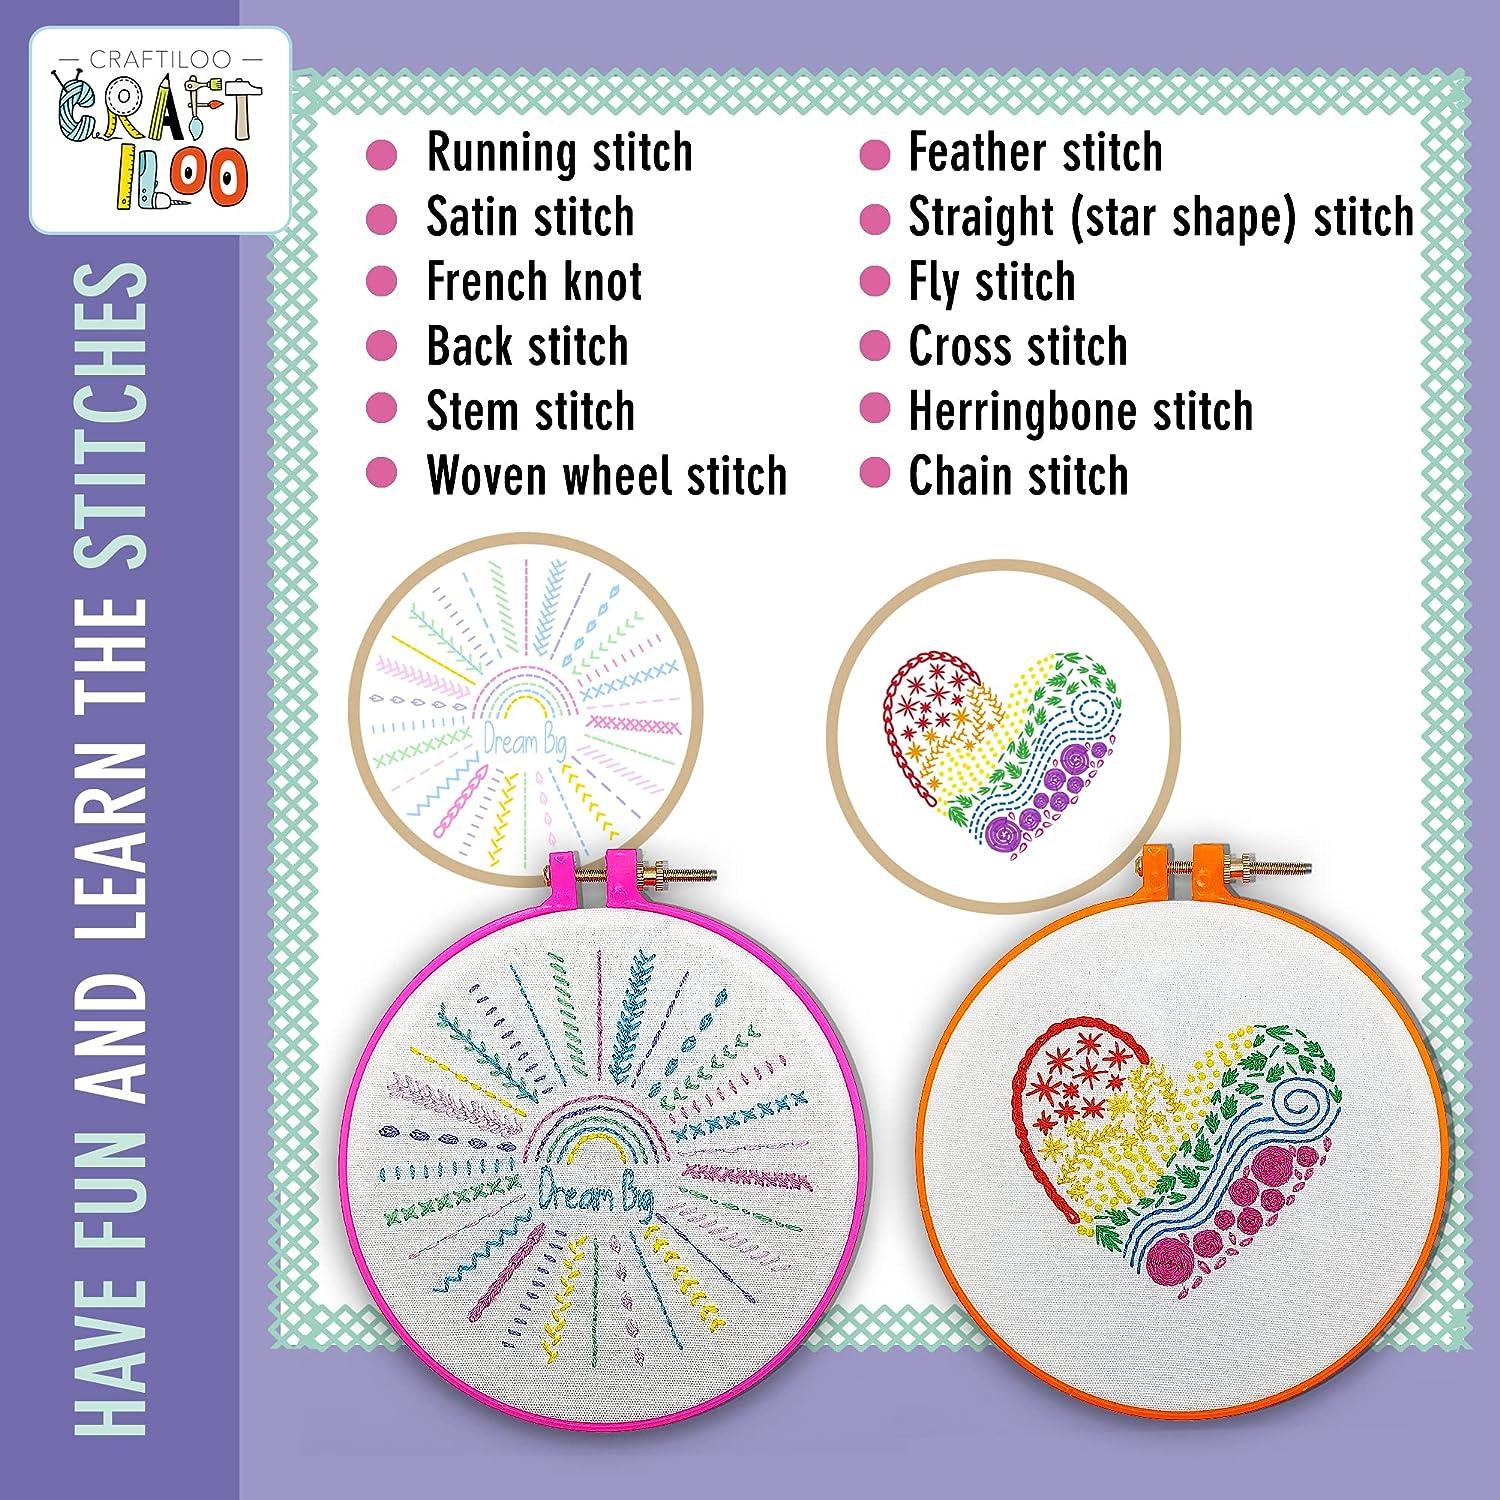 CRAFTILOO 10 Pre-Stamped Embroidery Patterns for Beginners Embroidery Kit  for Kids Girls Needlepoint Kits for Beginners Cross Stitch Craft Sewing